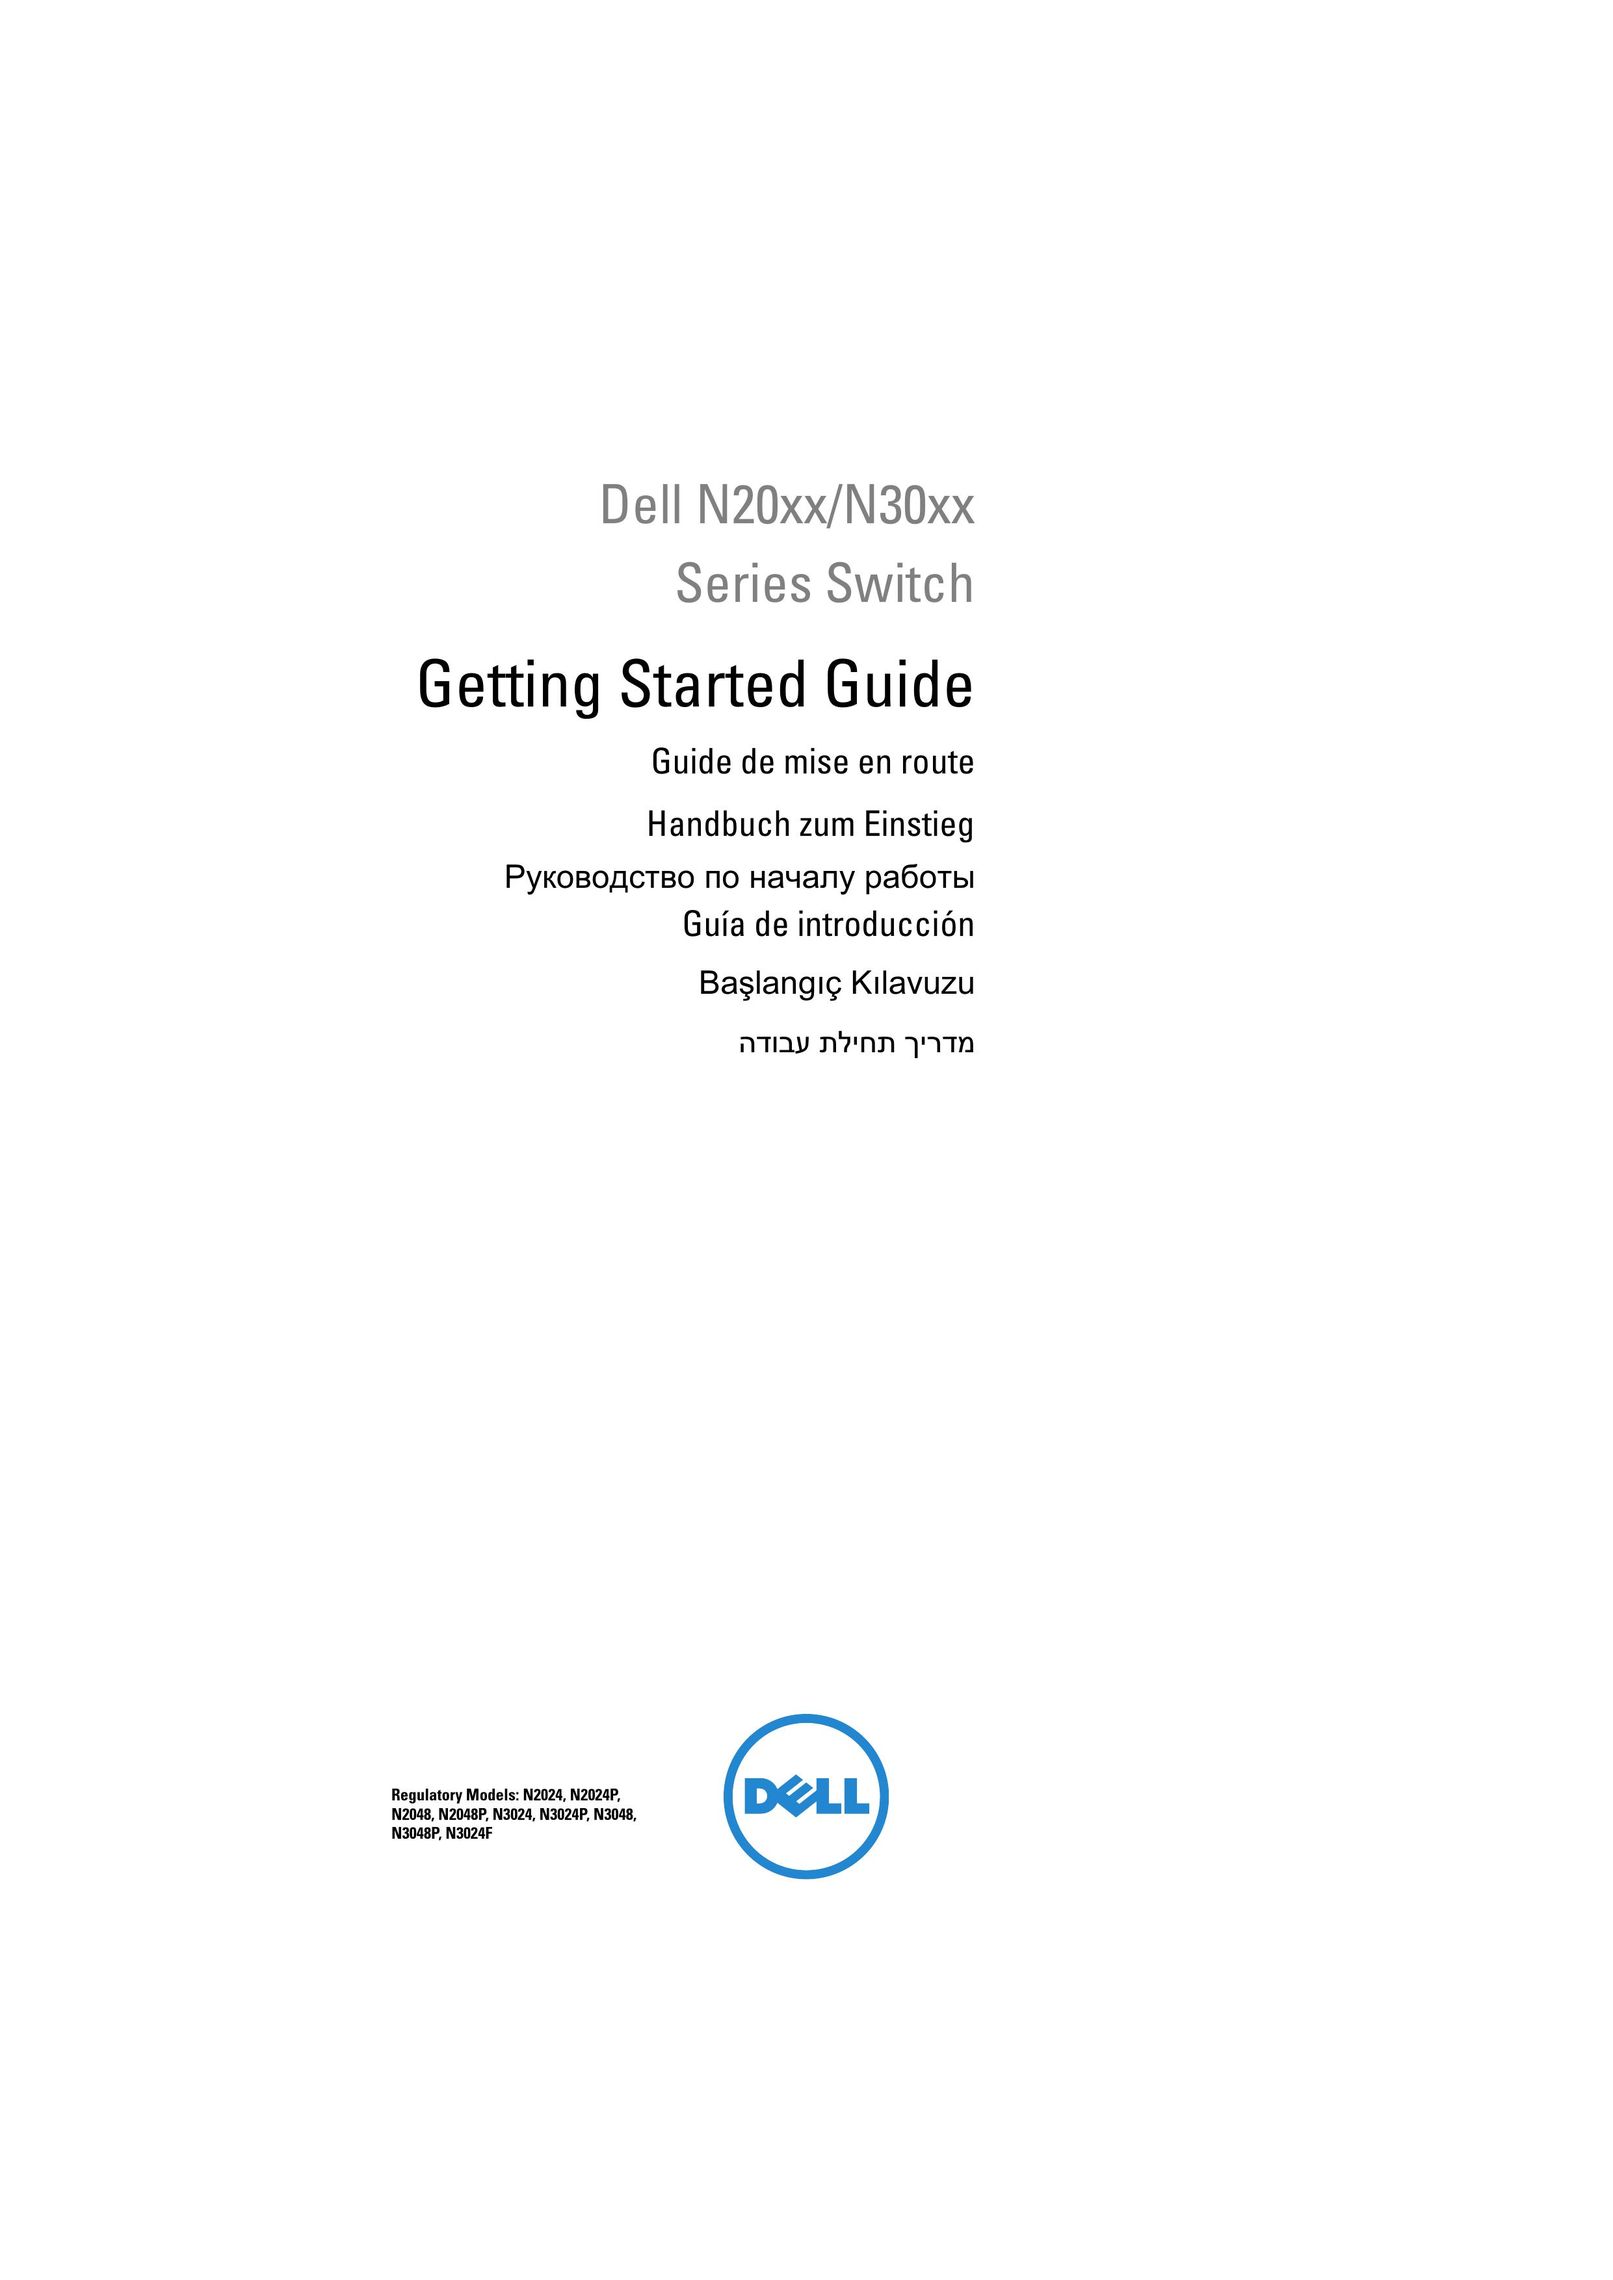 Dell N20xx Plumbing Product User Manual